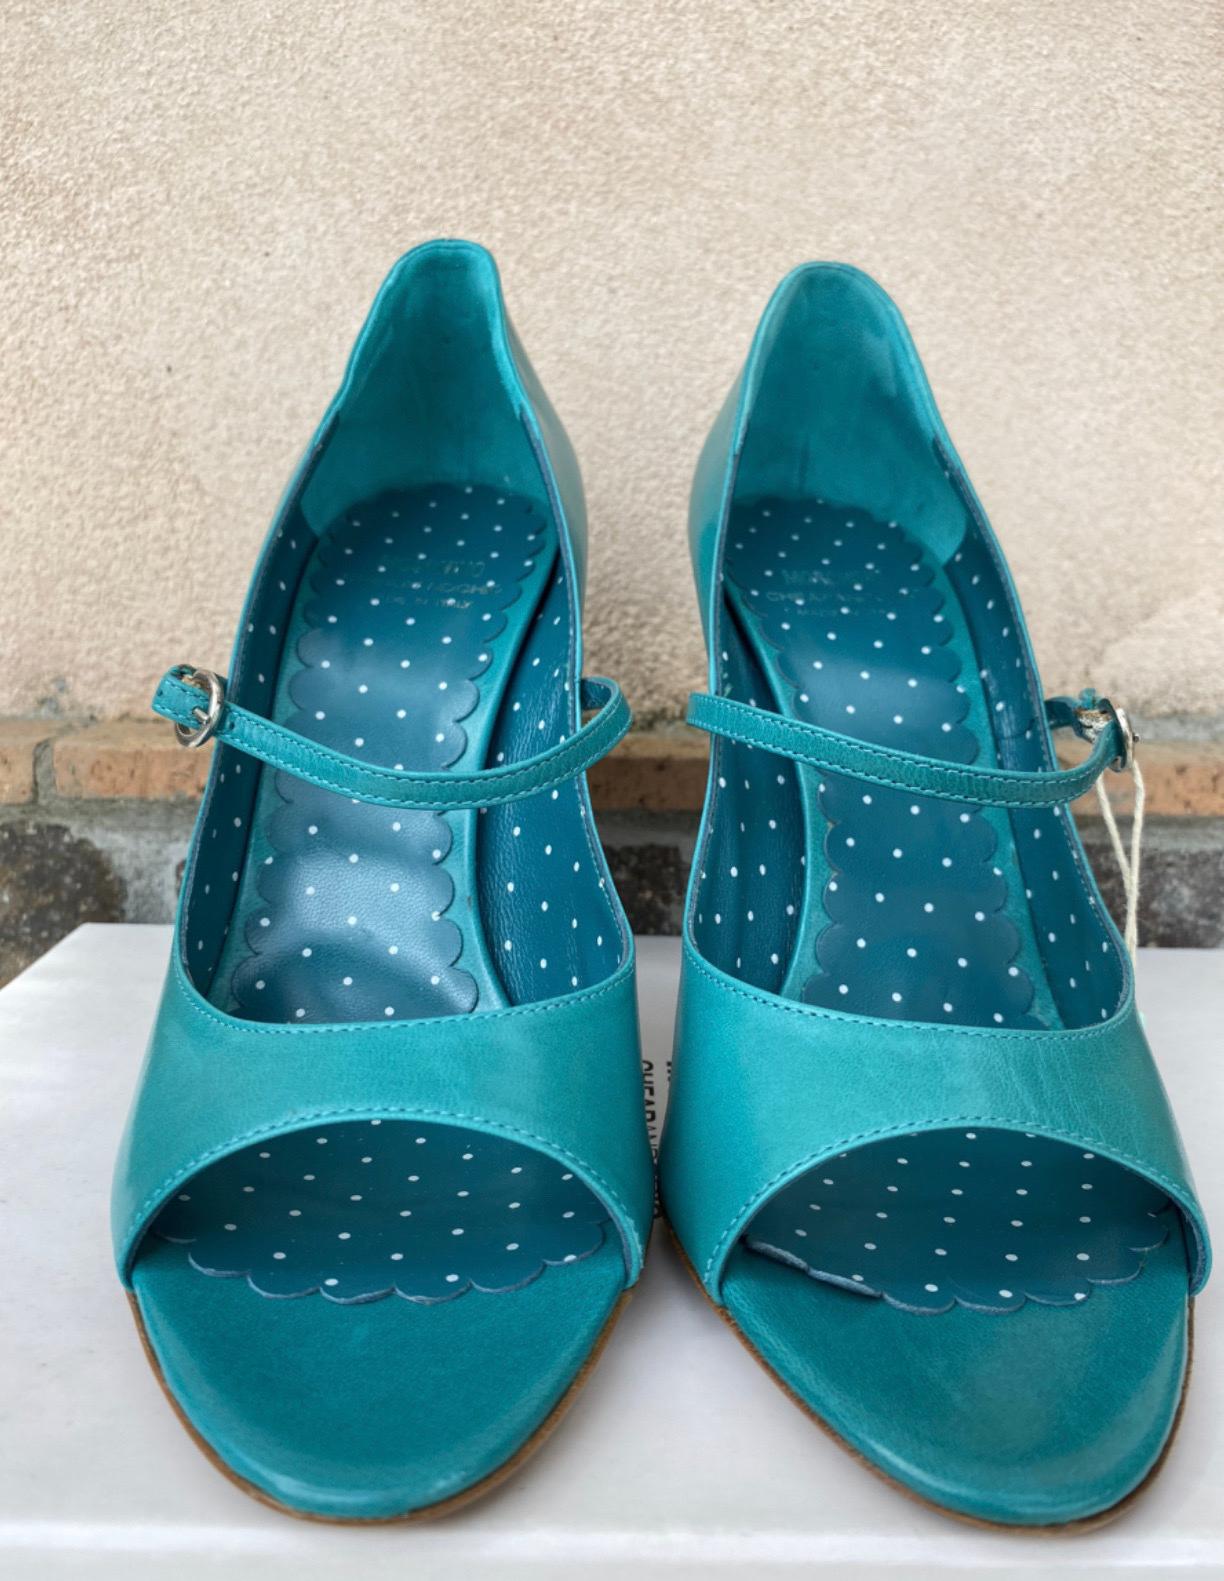 Blue Moschino Cheap & Chic teal Open toe Shoes For Sale